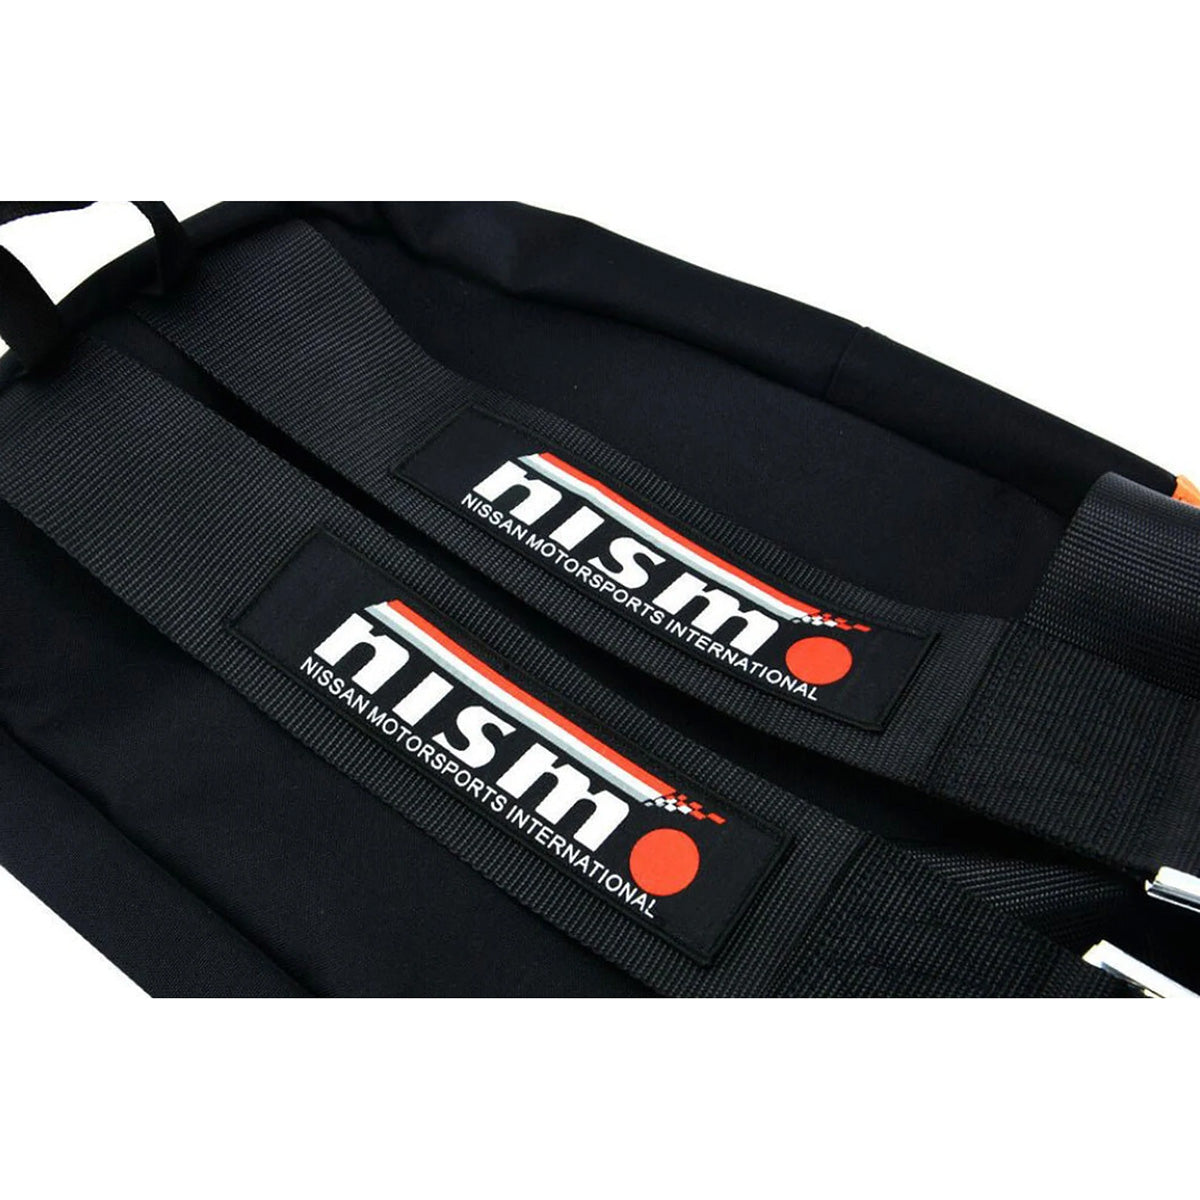 NISMO Bride Backpack with black racing harness straps. 